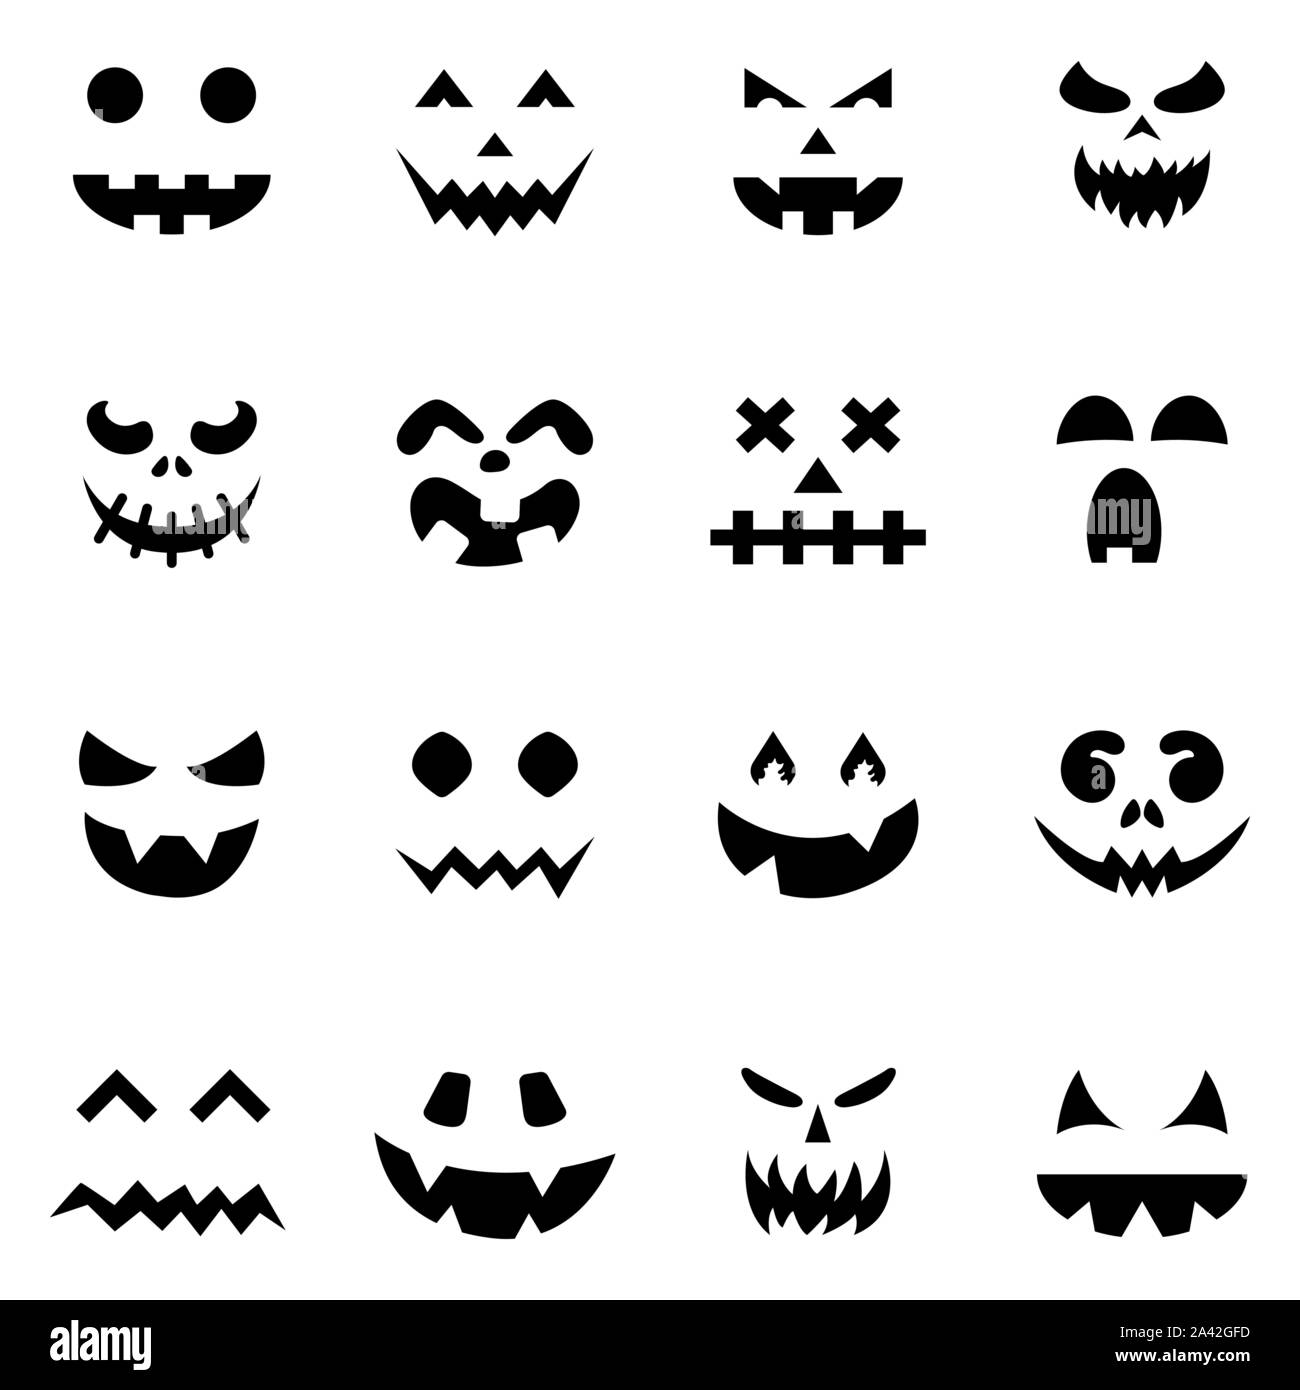 Pumpkin face silhouette icon for Halloween isolated on white background ...